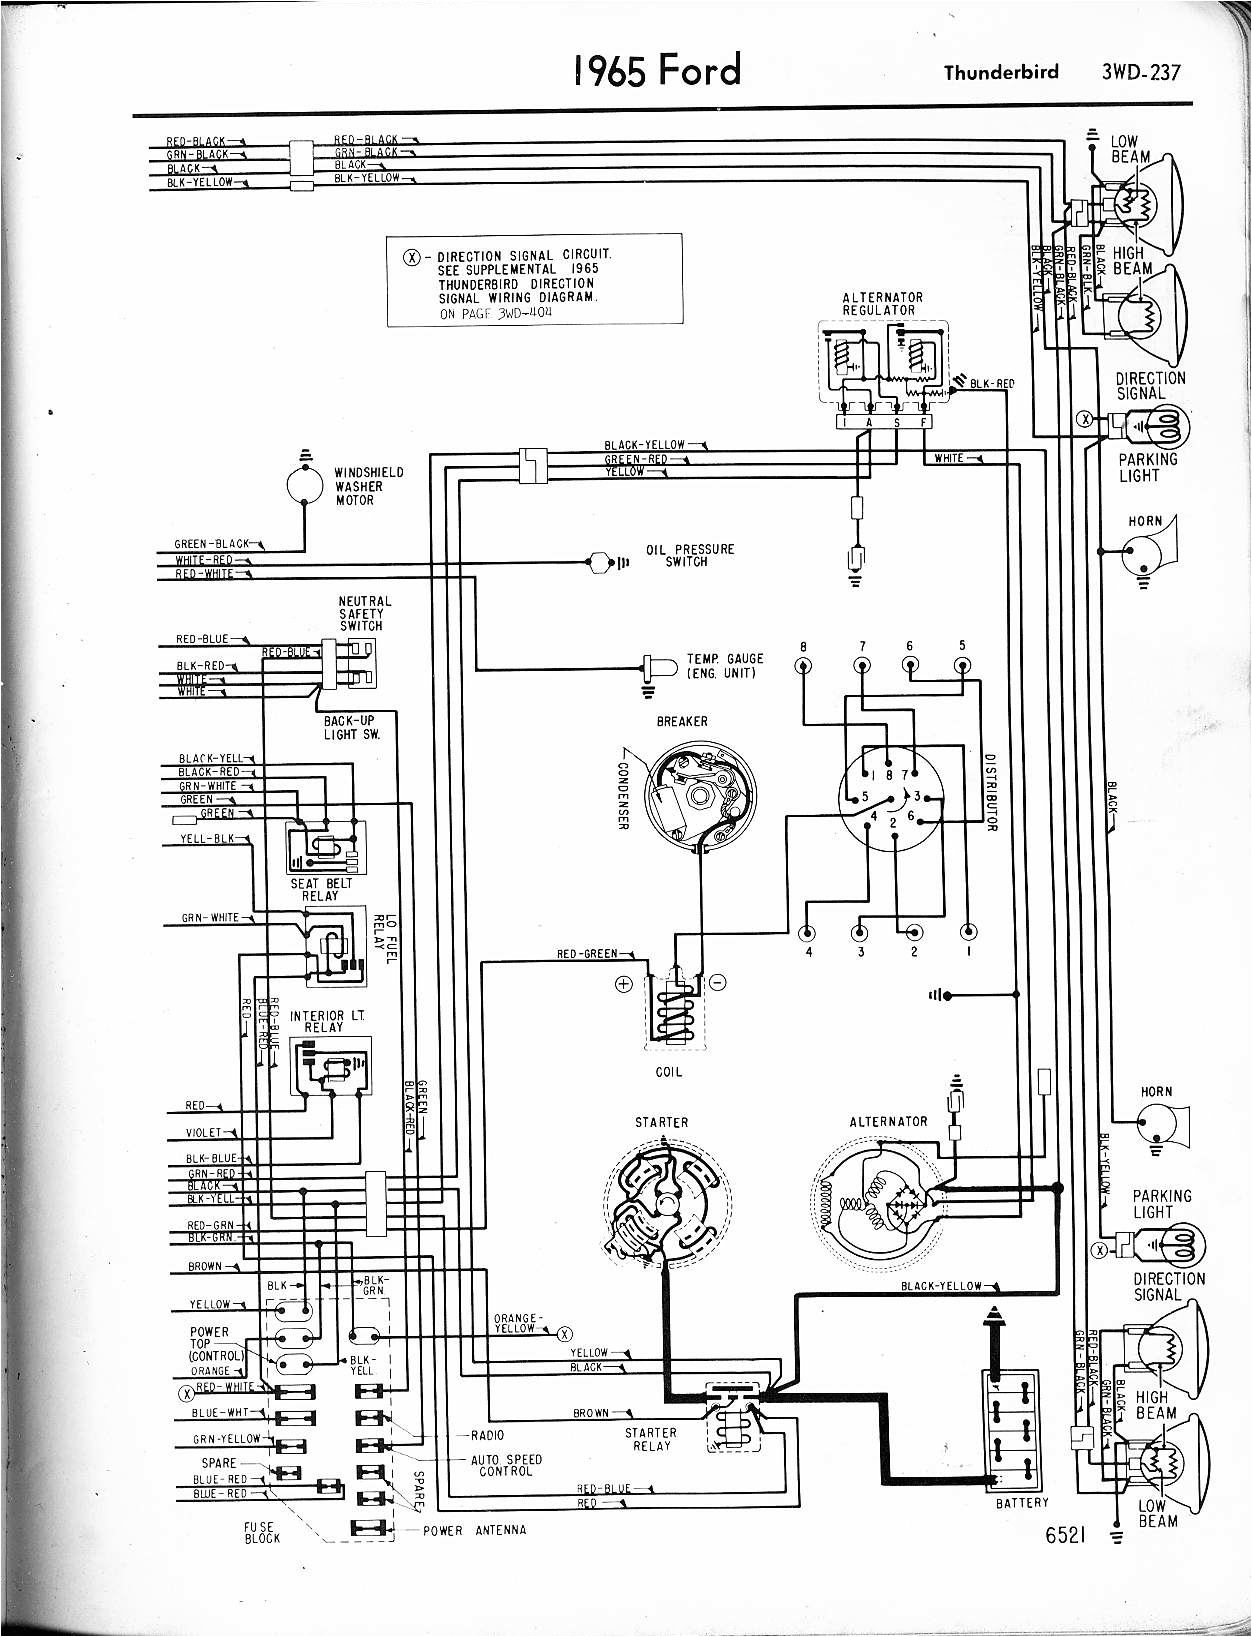 wiring diagram for a 65 ford f100 wiring diagram mega 1965 ford wiring schematic data diagram